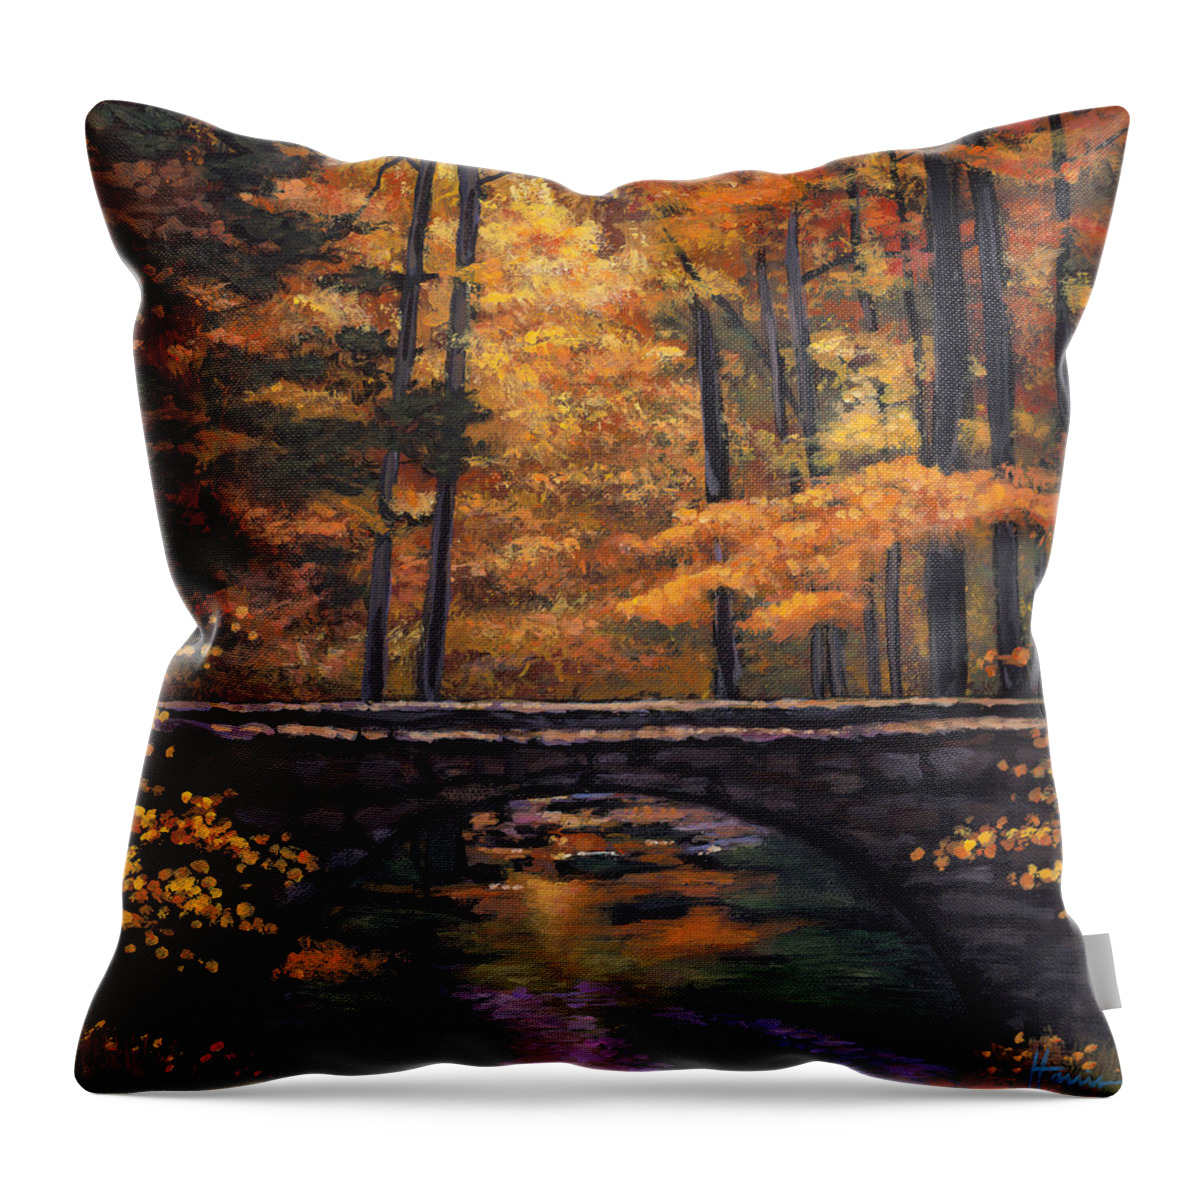 Southwest Landscape Throw Pillow featuring the painting Ozark Stream by Johnathan Harris